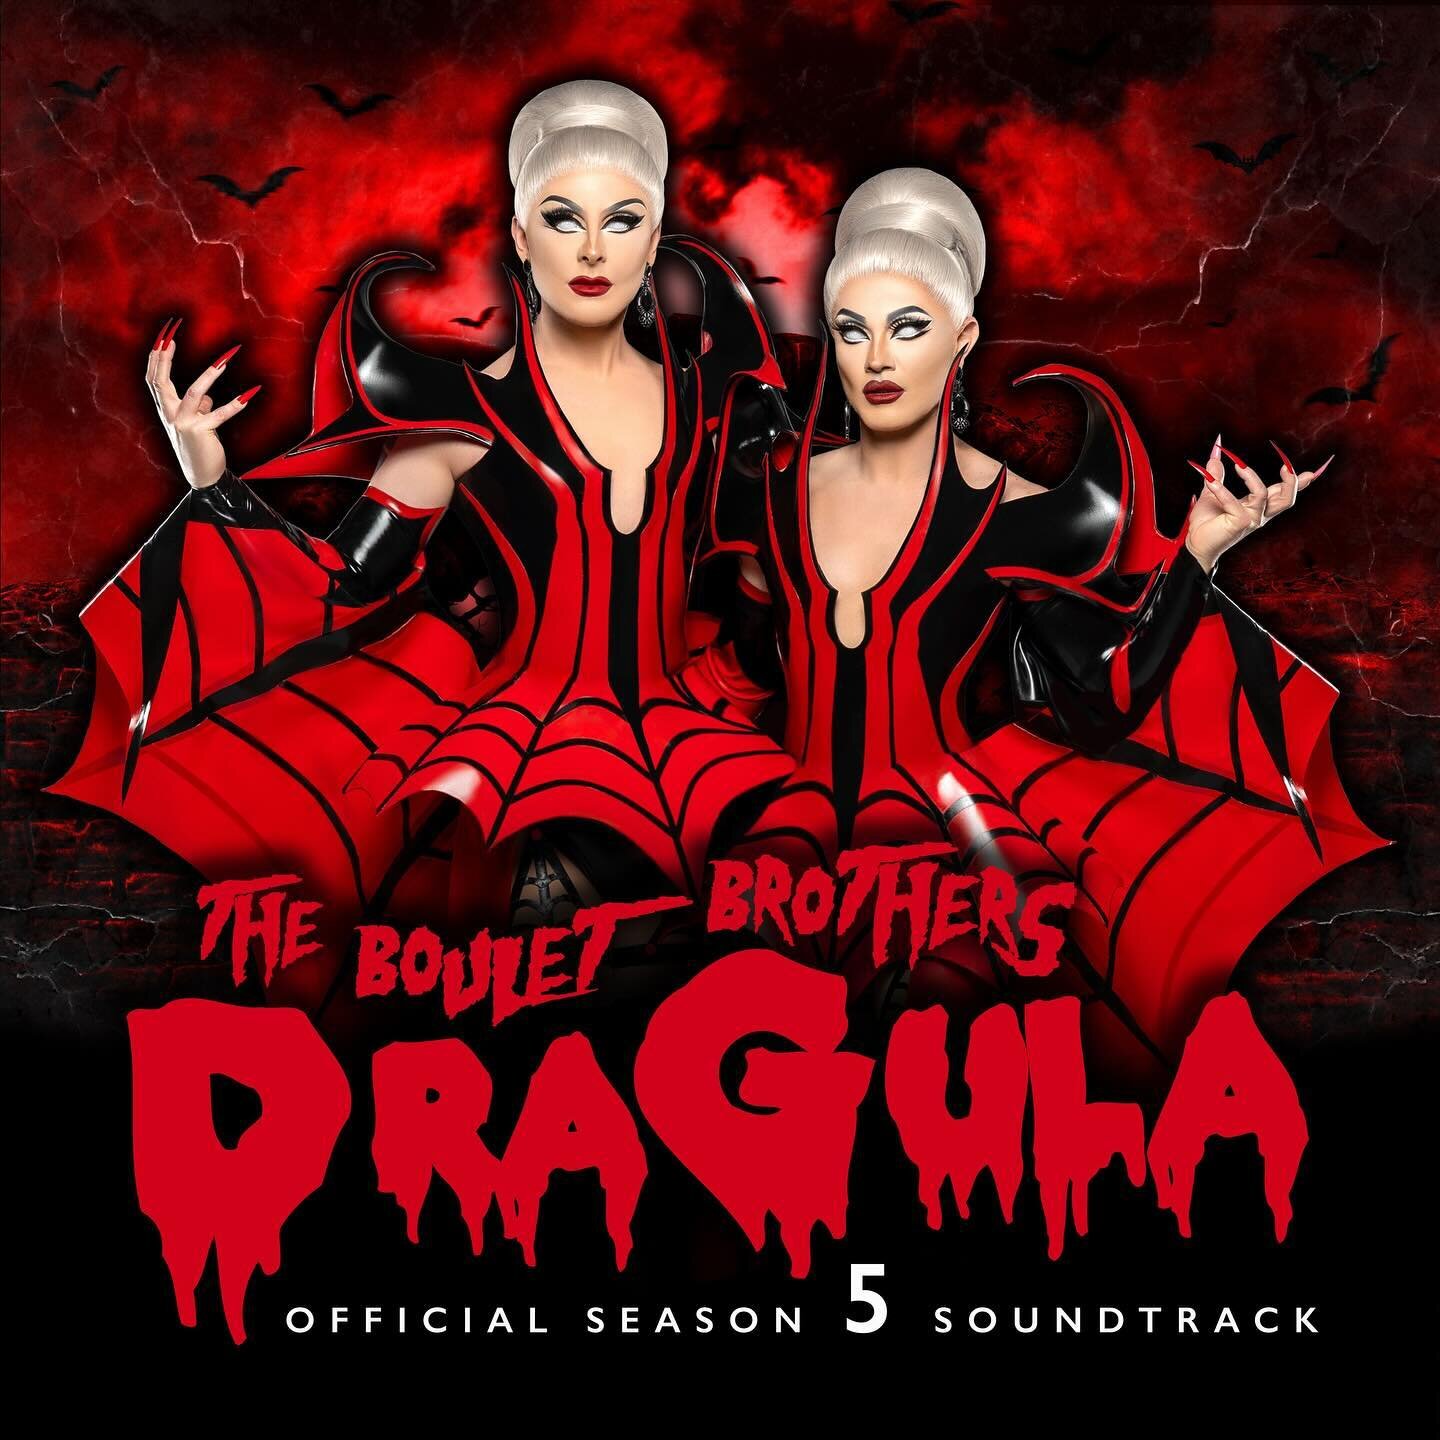 SEASON 5 SOUNDTRACK FROM @bouletbrothers 
BY: @bouletbrothers 
PRODUCED BY: @tomascostanza &amp; @shinyisshiny 
OUT WORLDWIDE, LINK IN BIO TO BUY/STREAM 👹🎶 #BOULETBROTHERS #DRAGULA #BB_DRAGULA